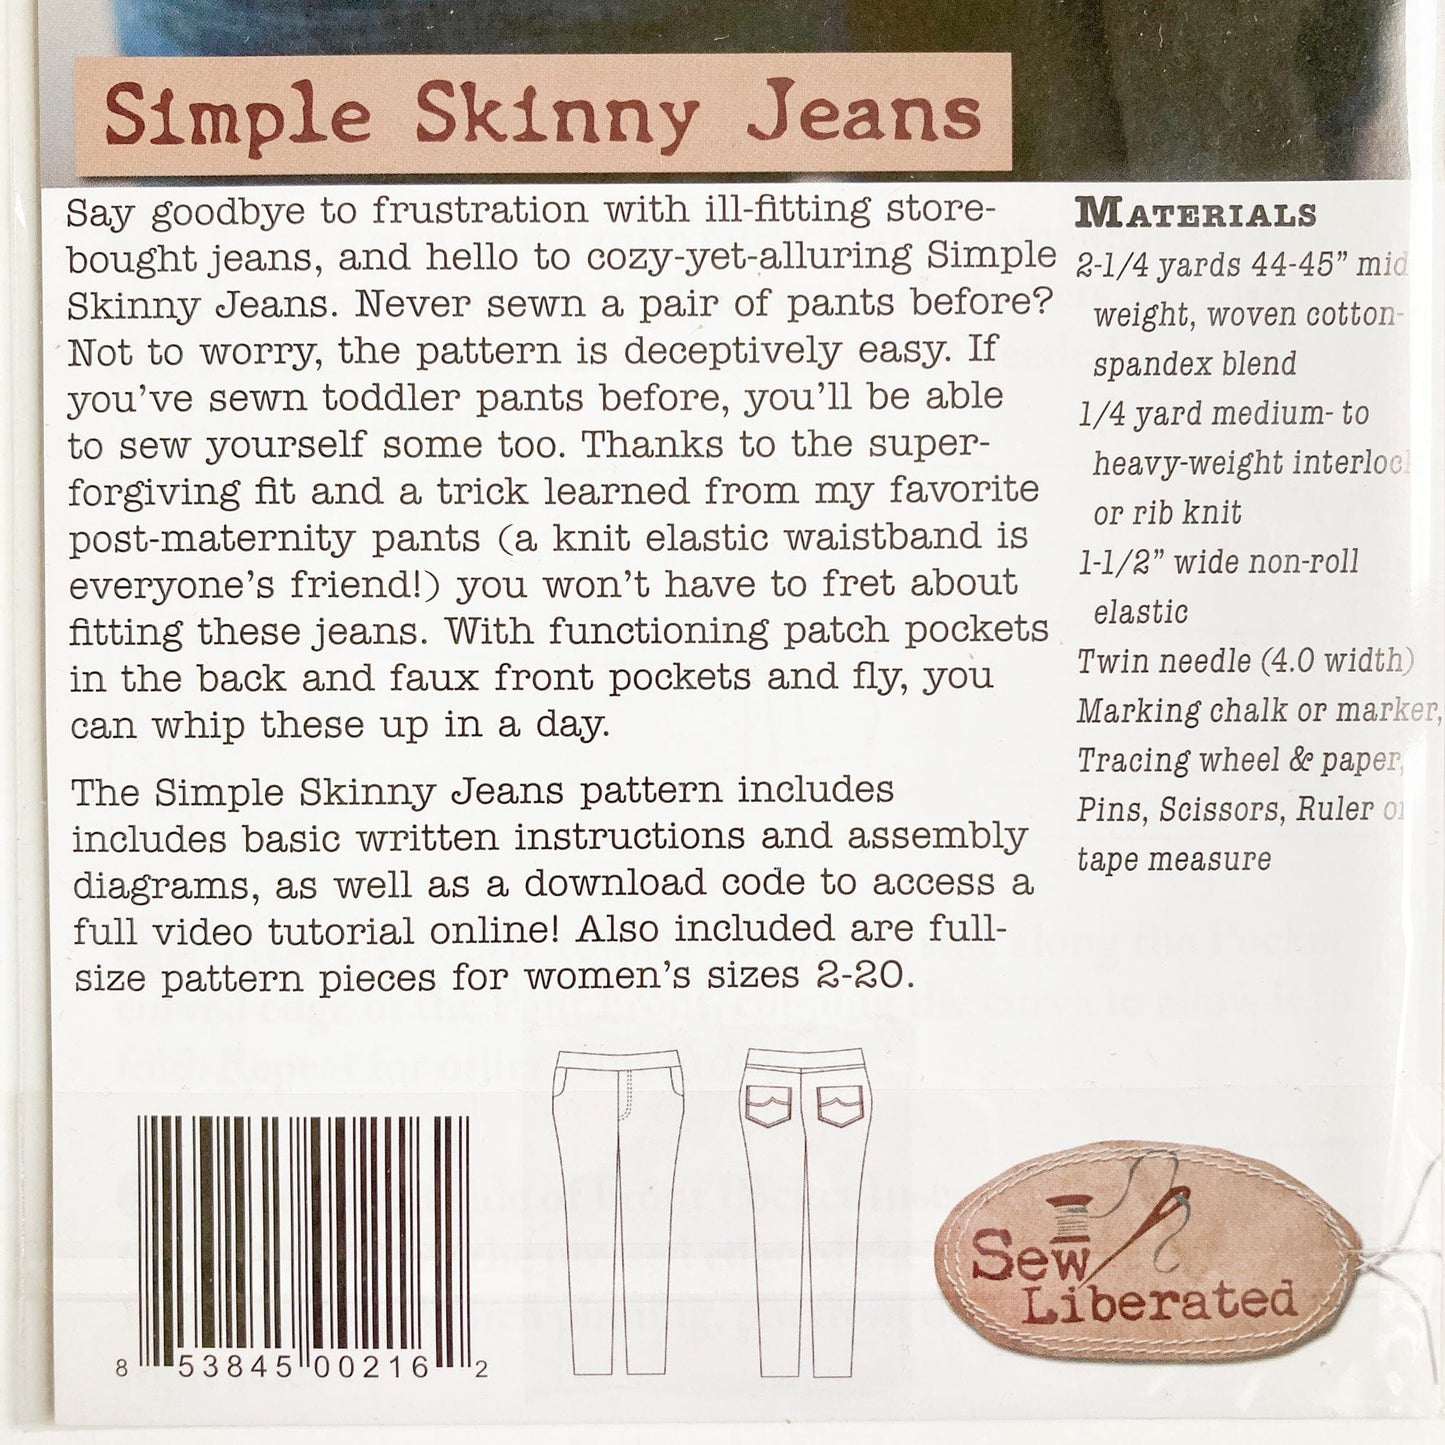 Sew Liberated: Simple Skinny Jeans